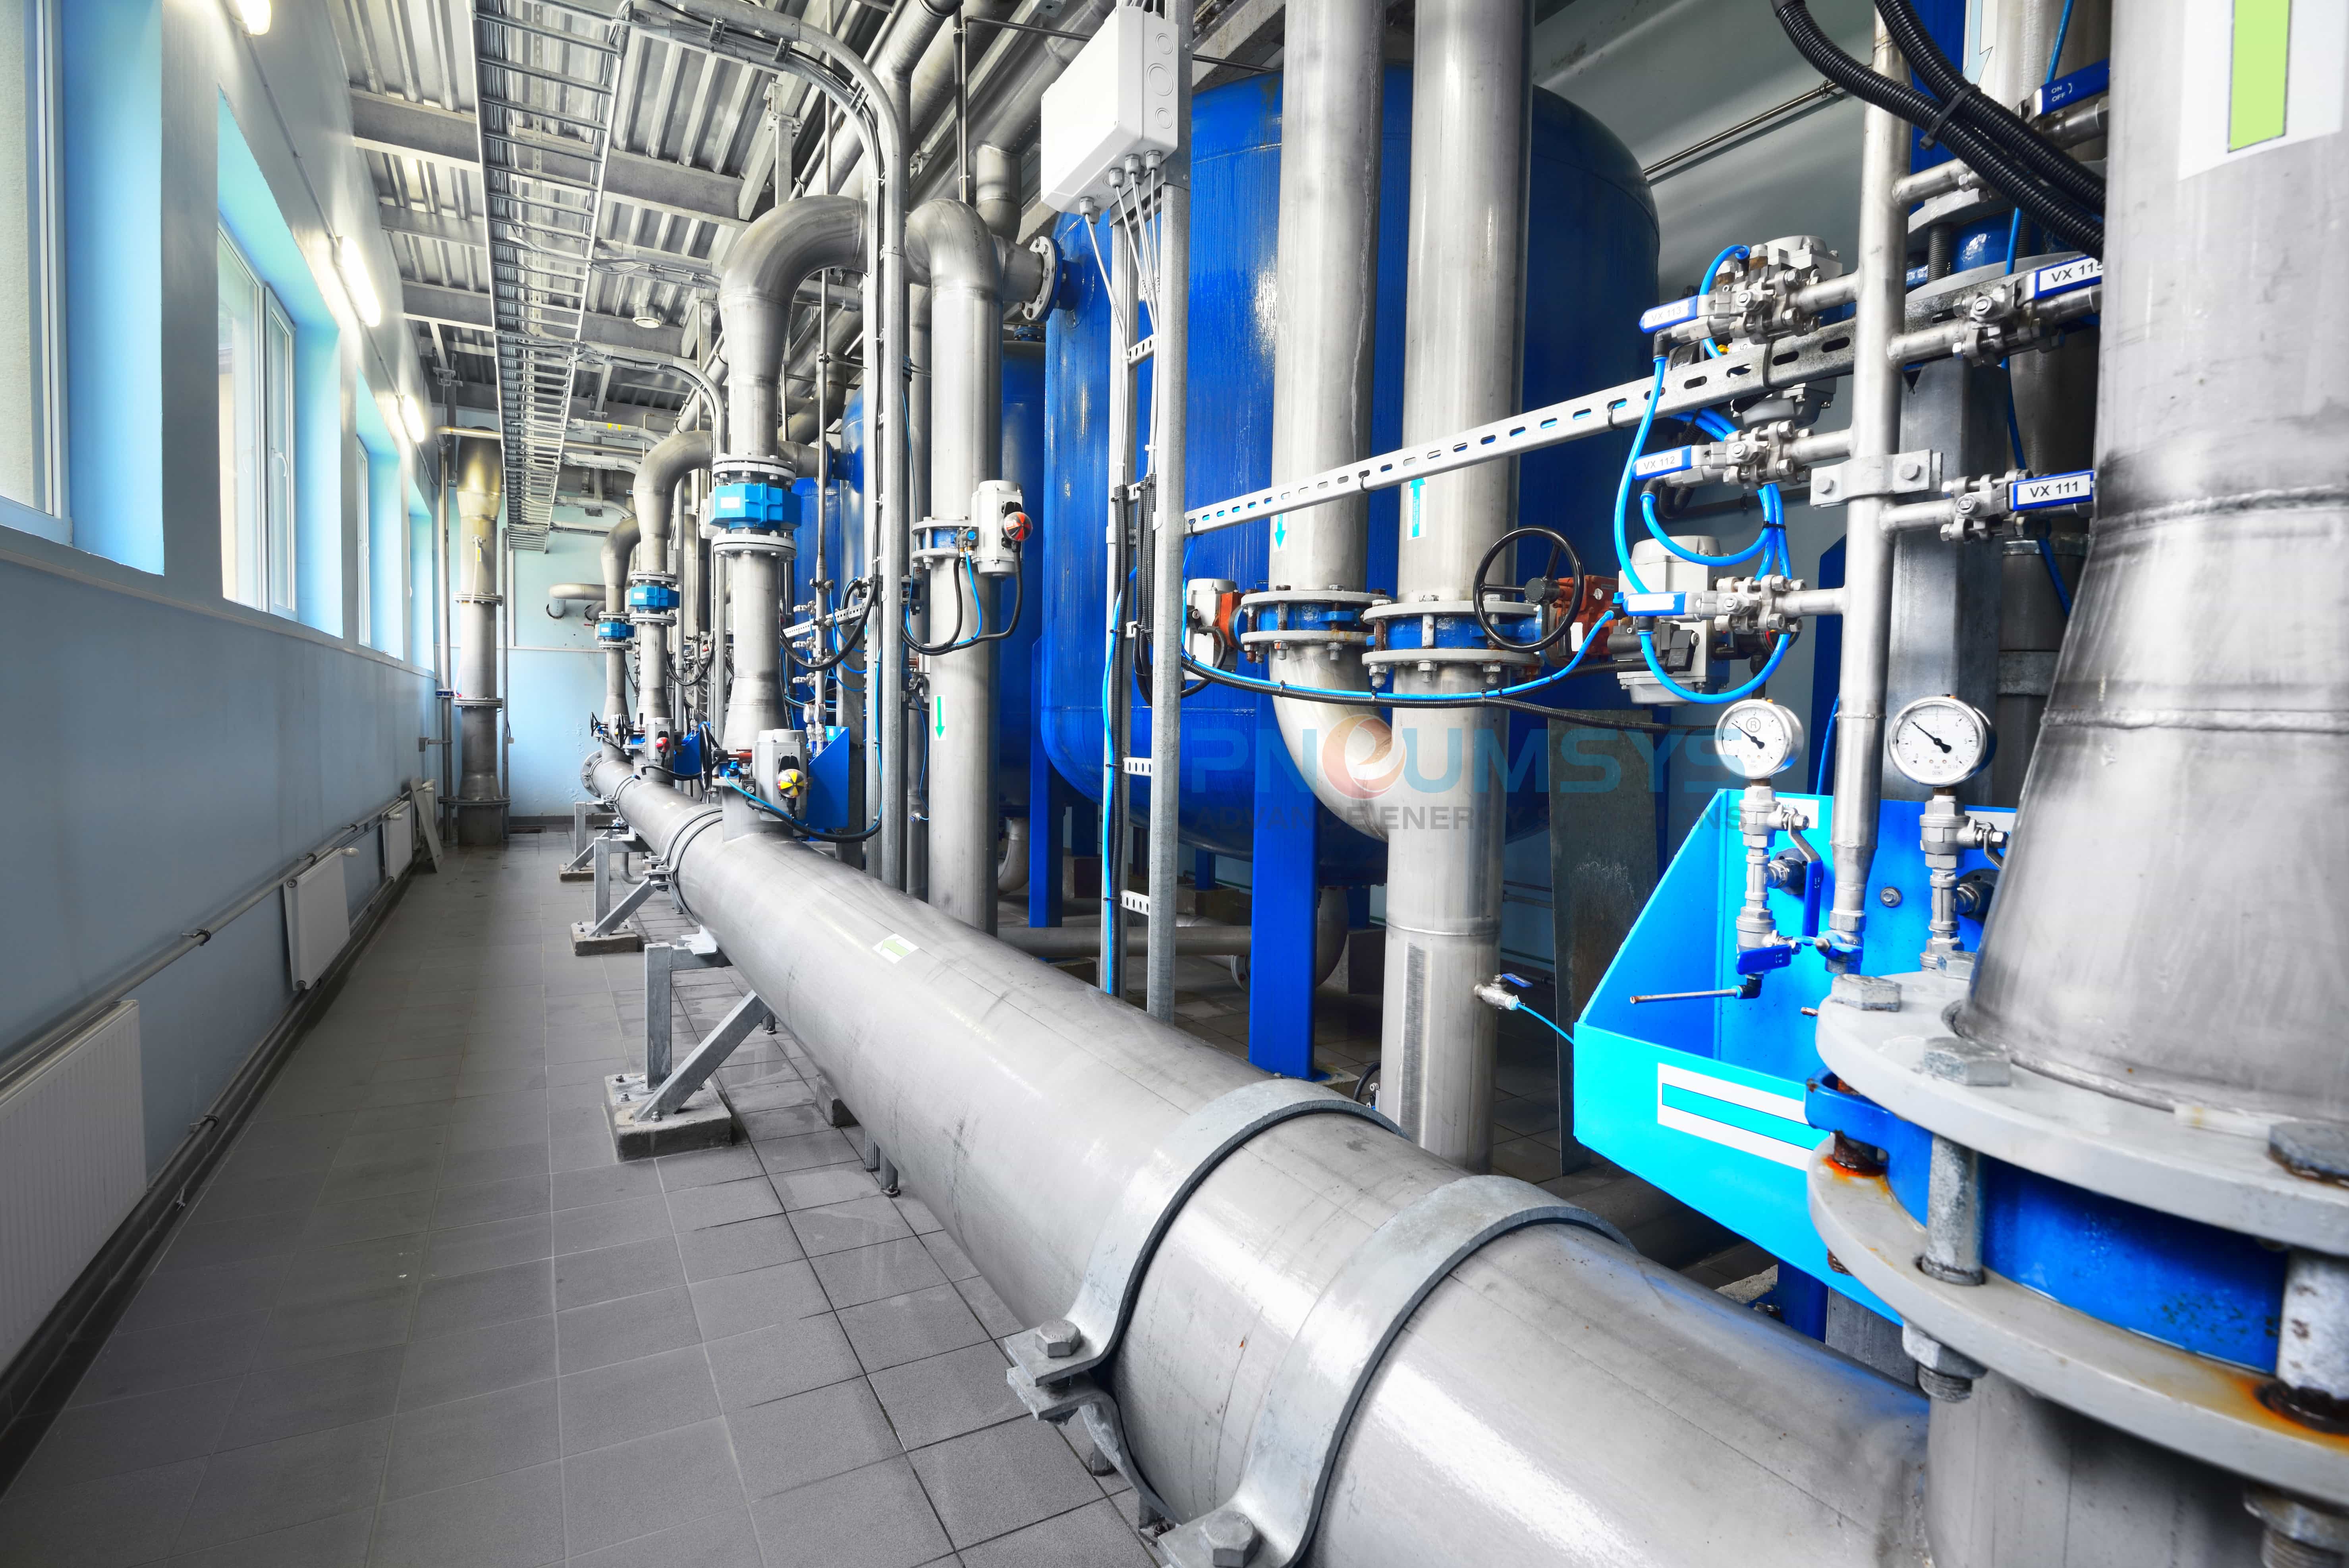 MS/ GI Pipeline for Cooling Tower & Industrial Gases